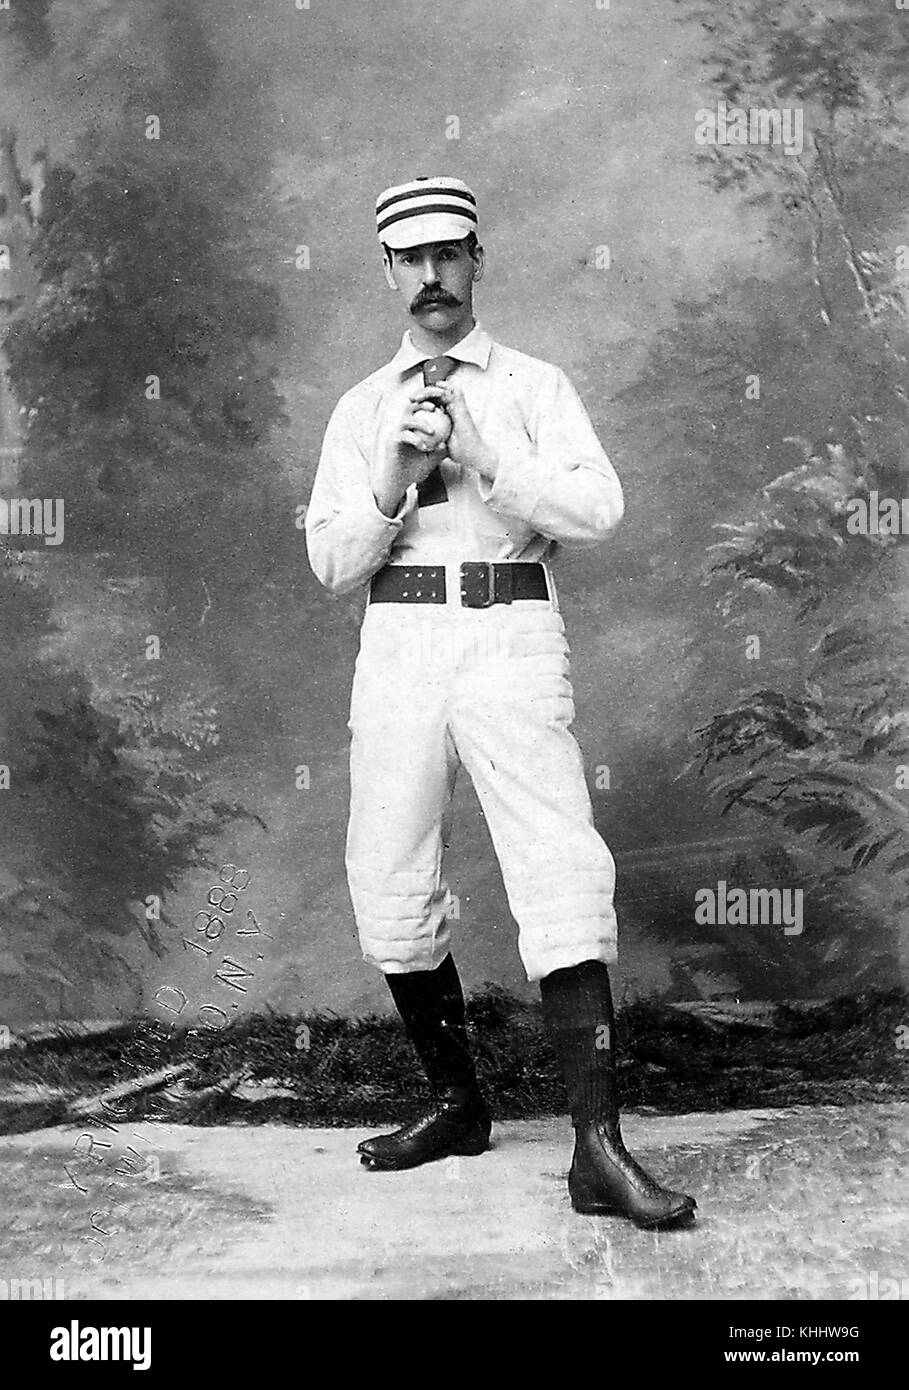 Portrait if Charlie Ferguson, American right-handed pitcher in Major League Baseball who played his entire four-year career for the Philadelphia Quakers, standing in pitching stance, photograph by GE Gray, 1900. From the New York Public Library. Stock Photo